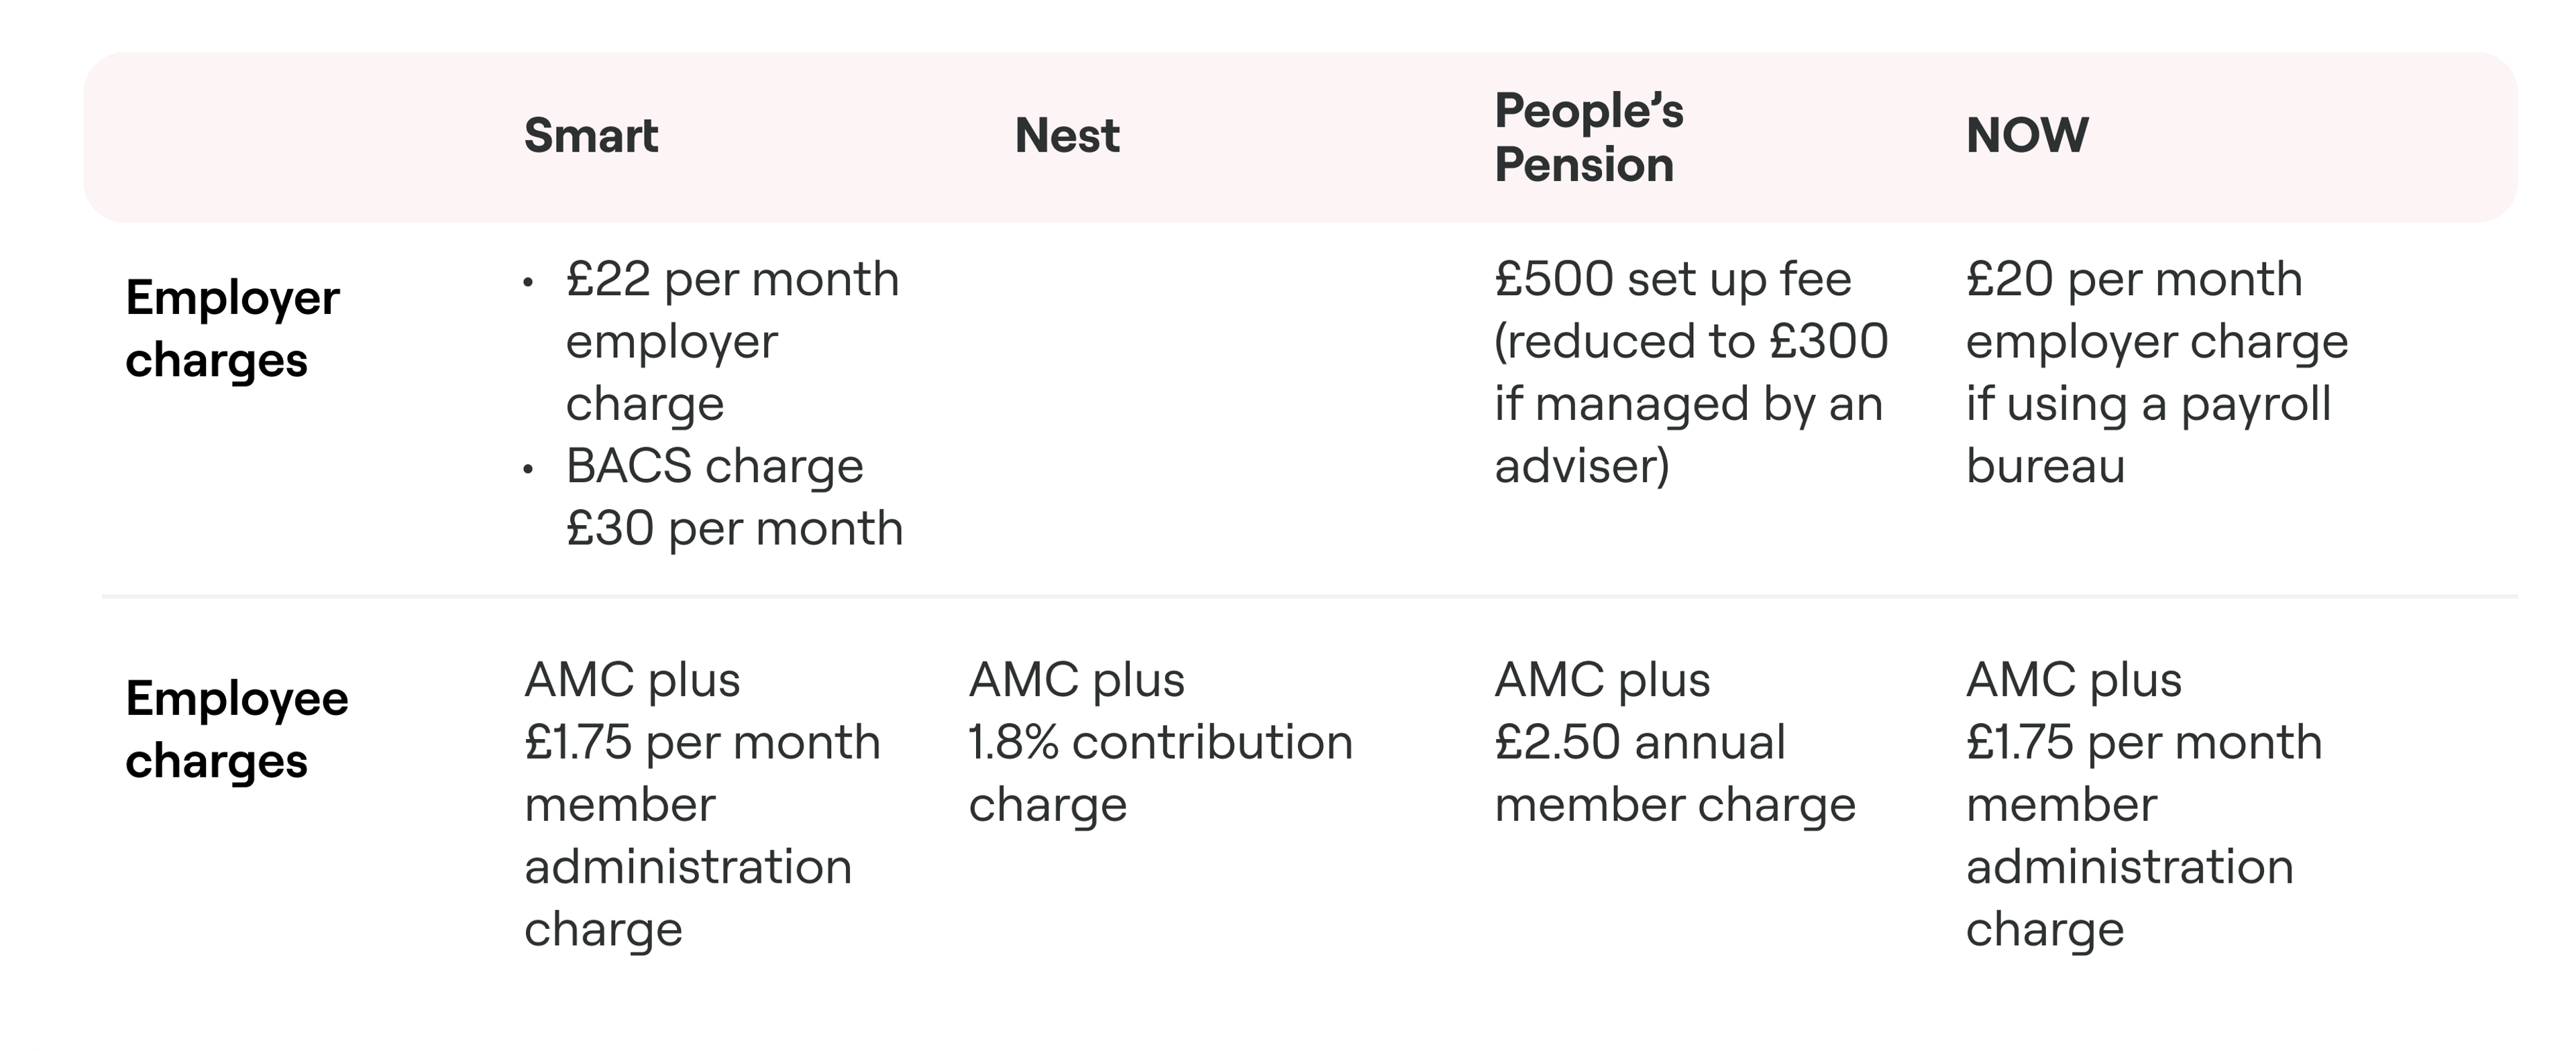 The extra charges of UK pension providers